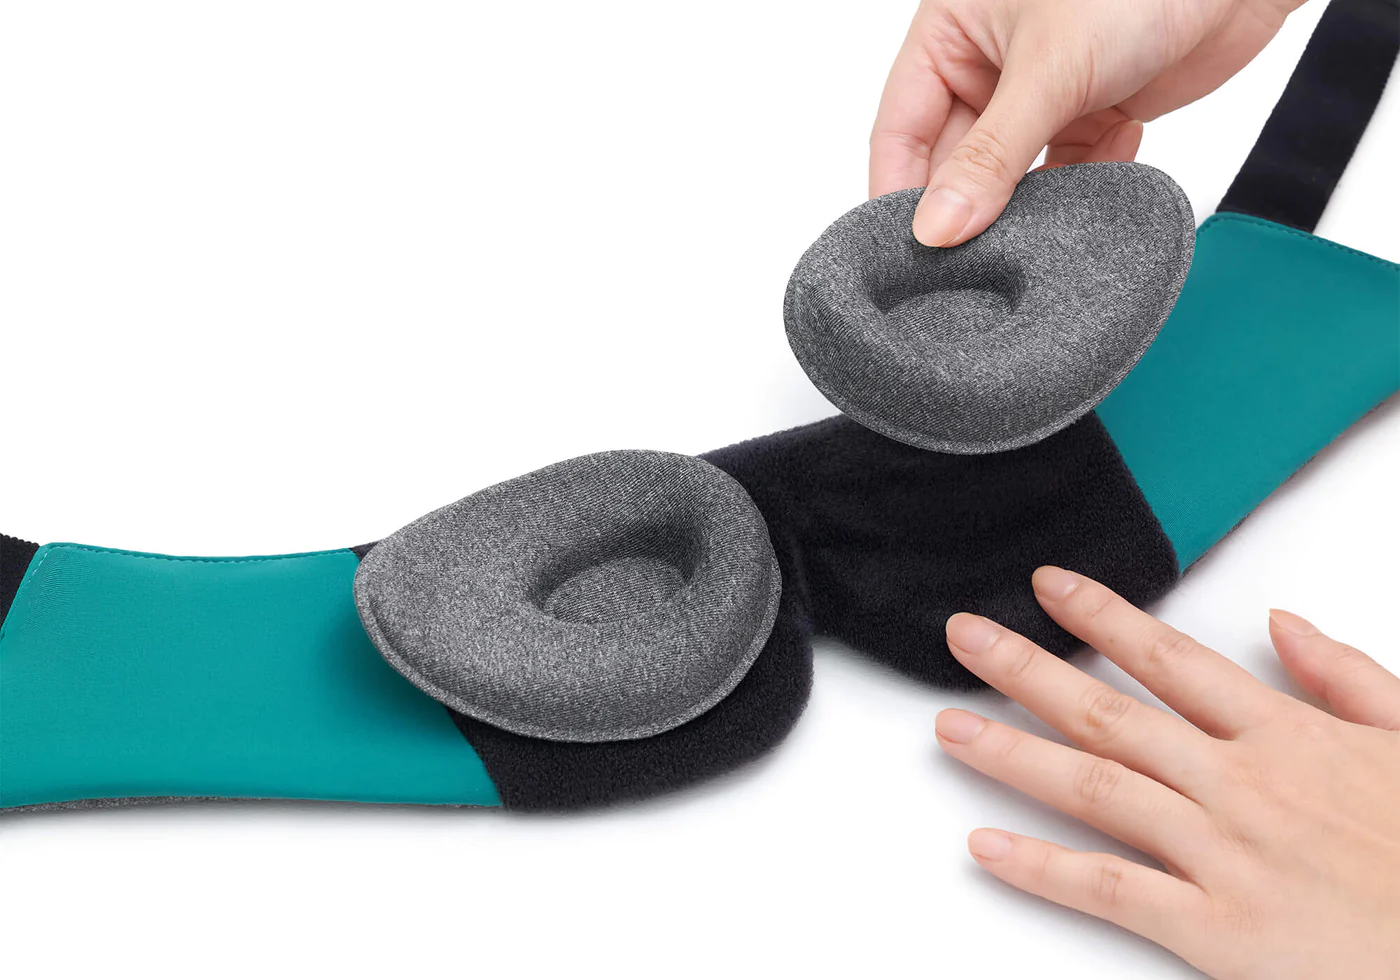 Hands attaching 1 of 2 gray tapered eye cups to the black and green interior of a sleep mask for headaches.